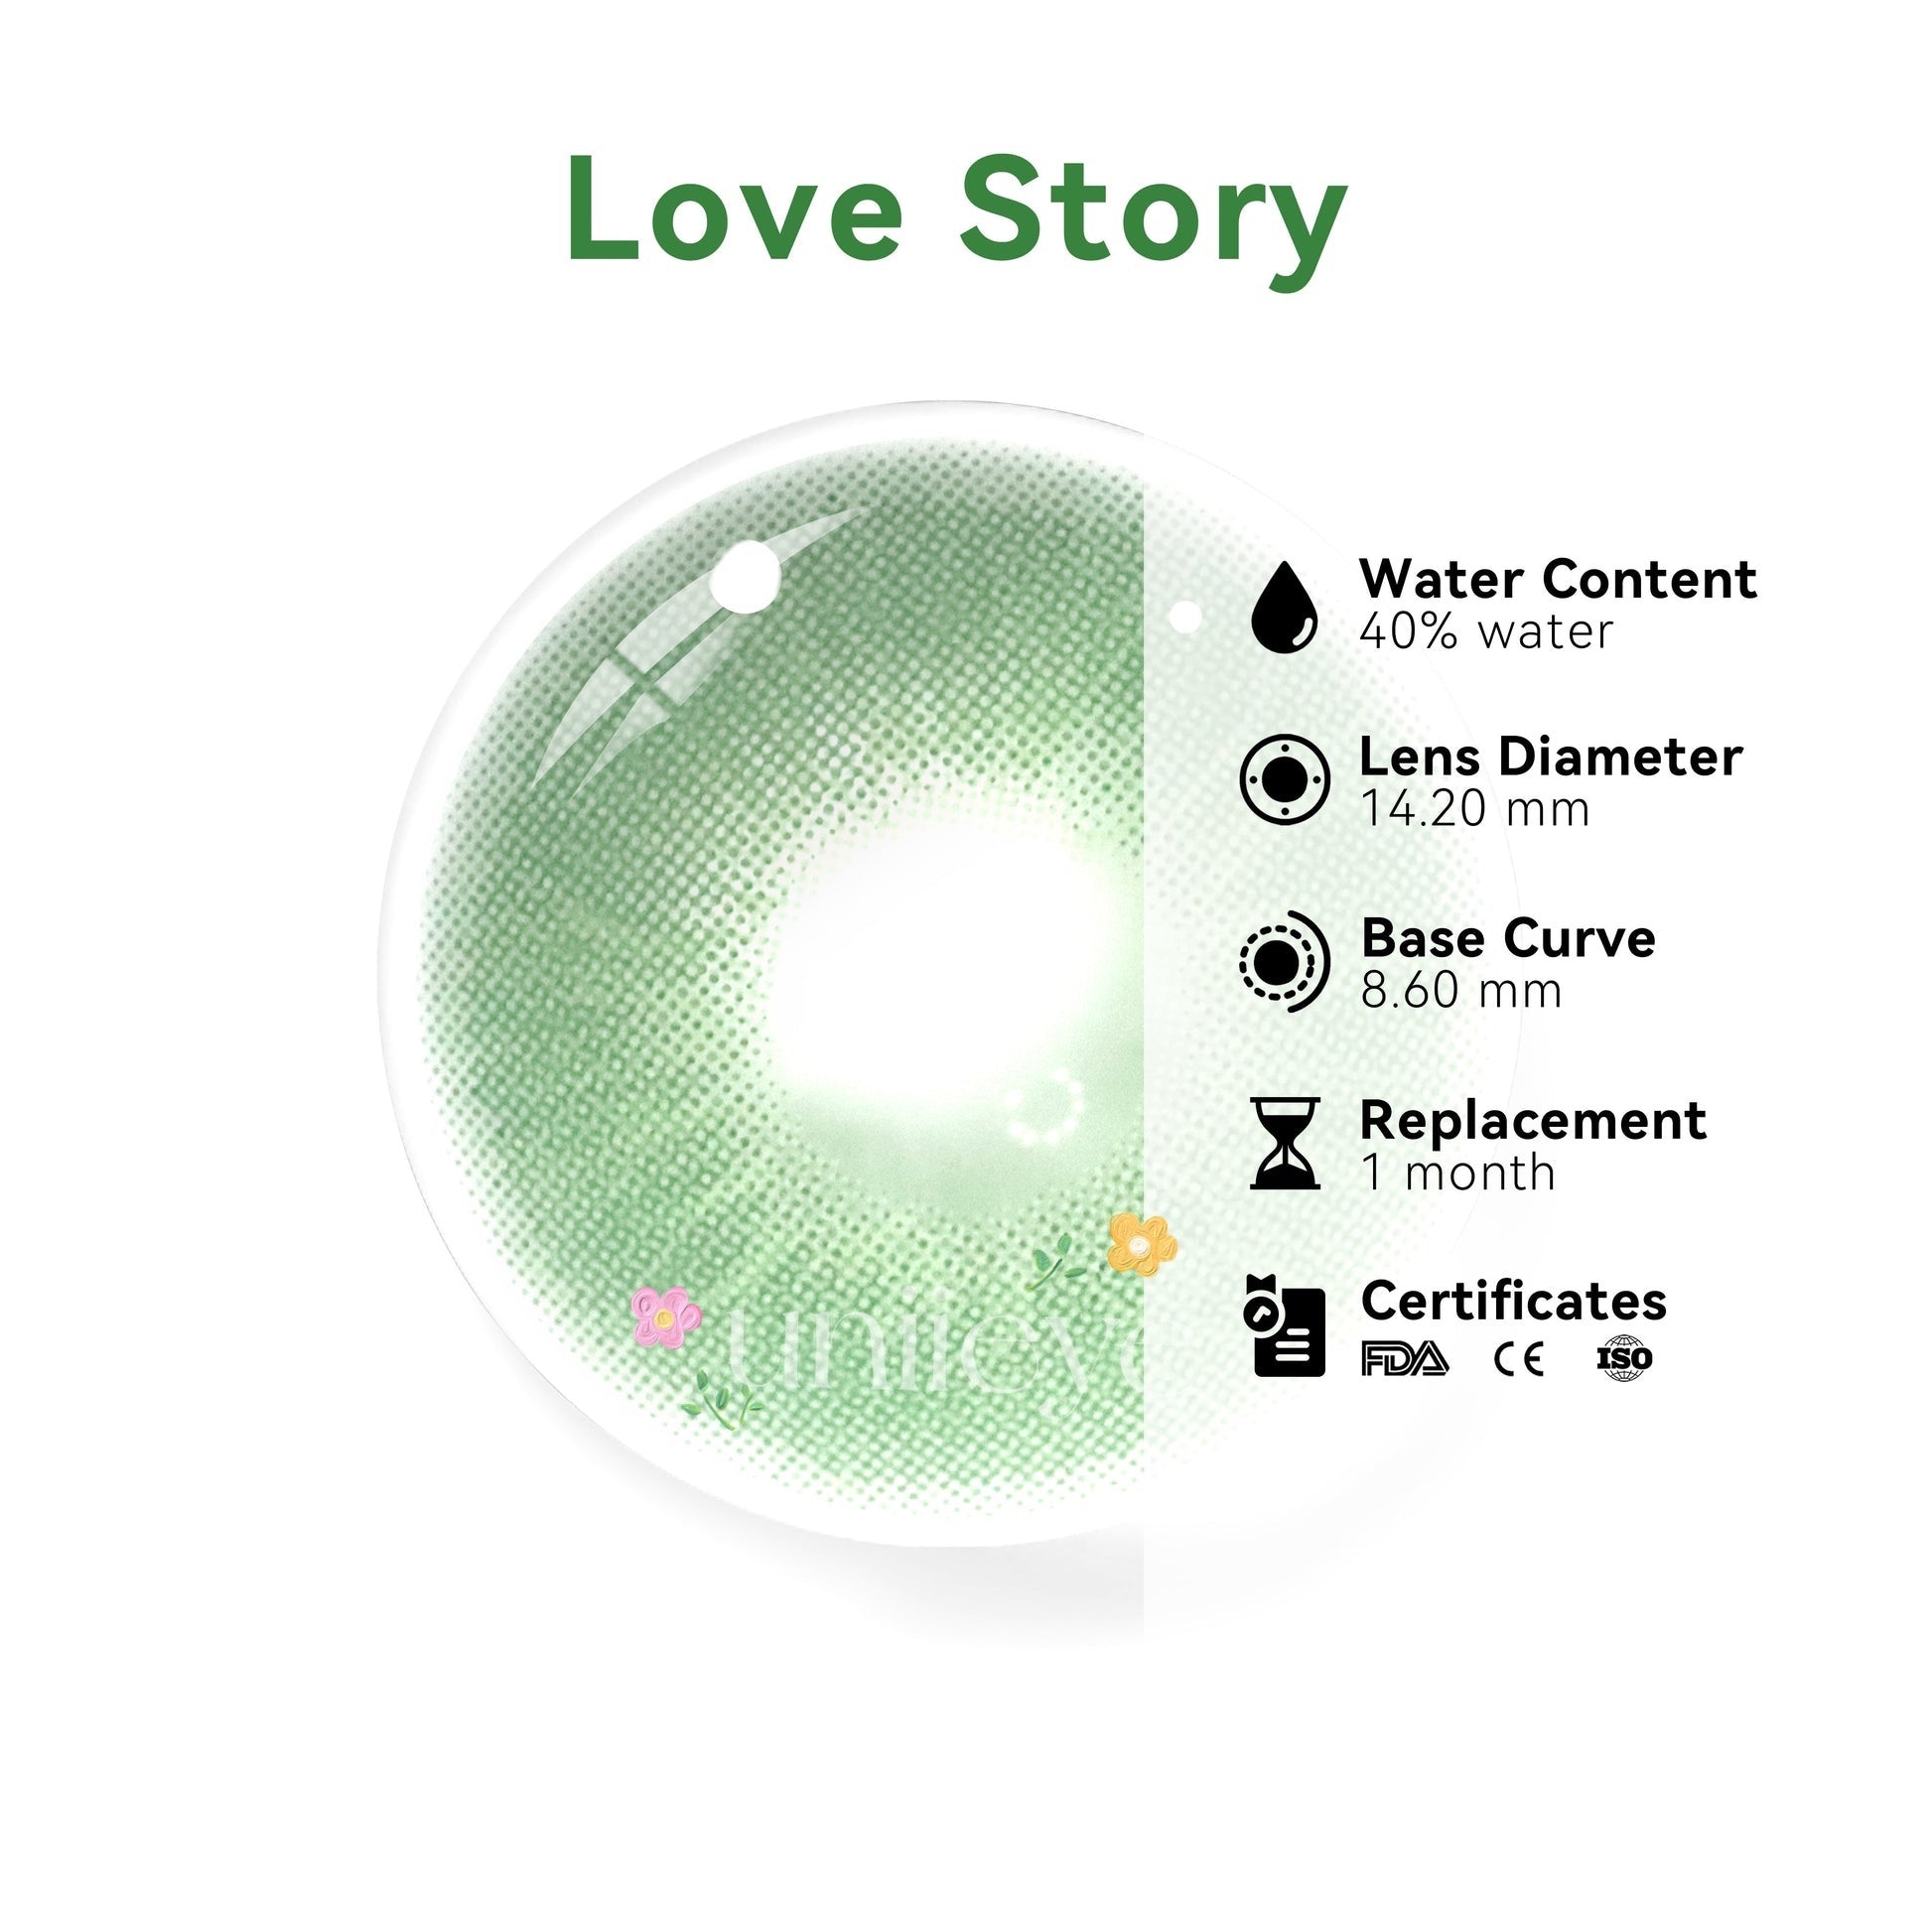 Uniieye Love Story Endorphin Green Yearly Colored Contacts - Uniieye